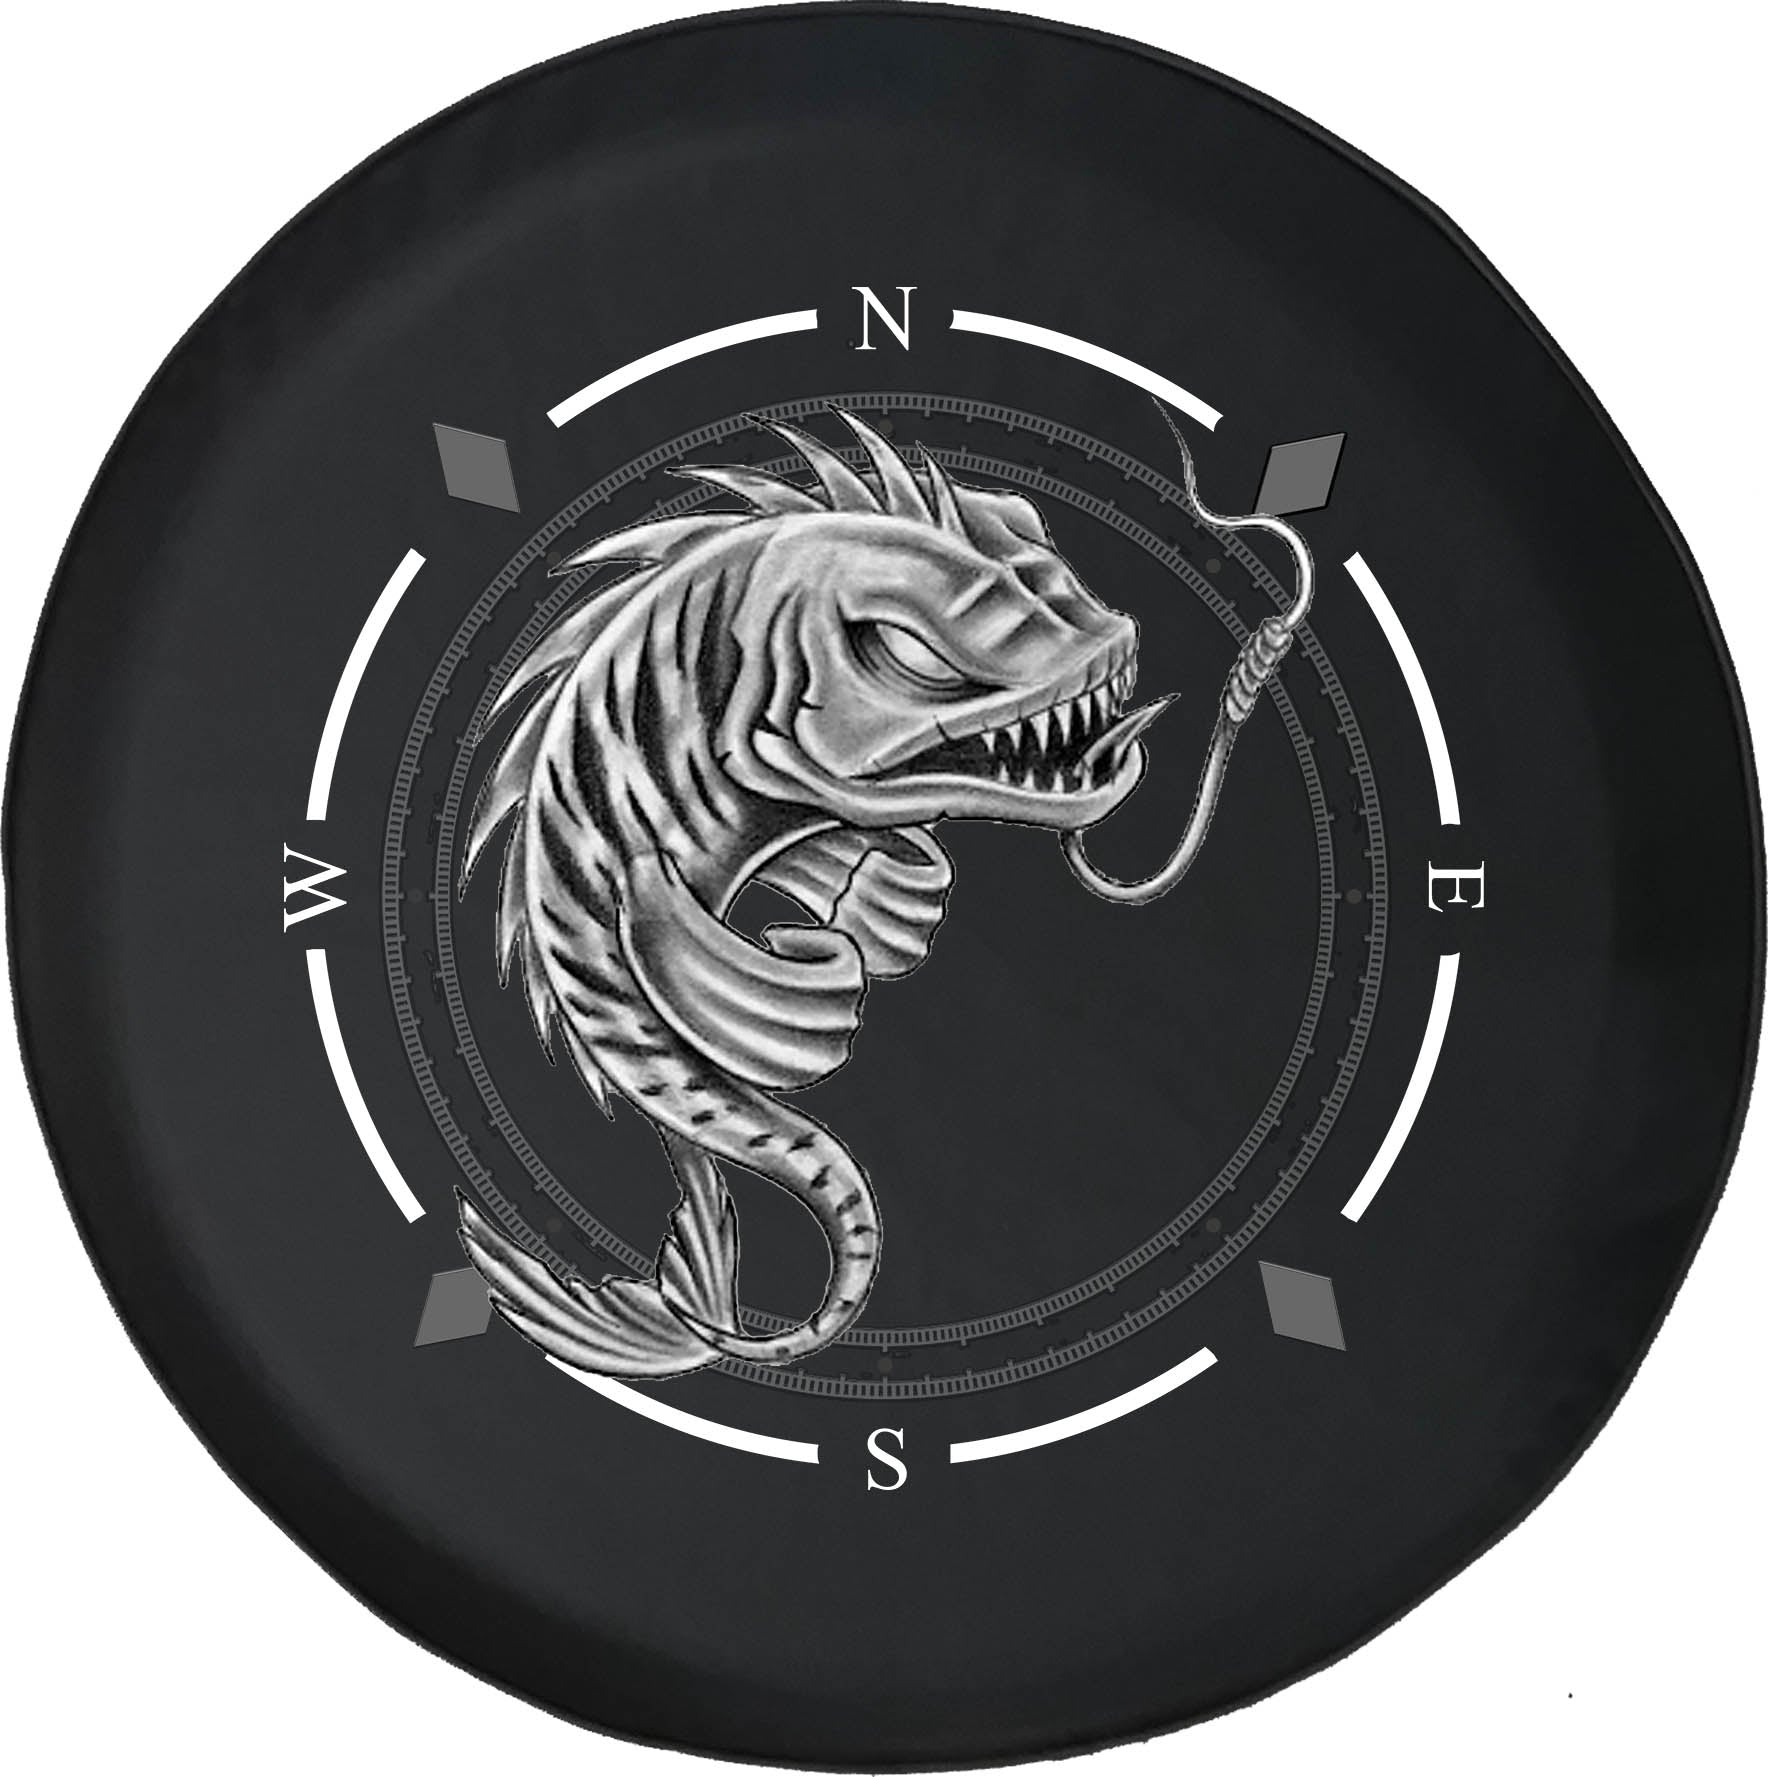 Spare Tire Cover Compass Fighter Fish Fishing Wheel Covers Fit for SUV accessories Trailer RV Accessories and Many Vehicles